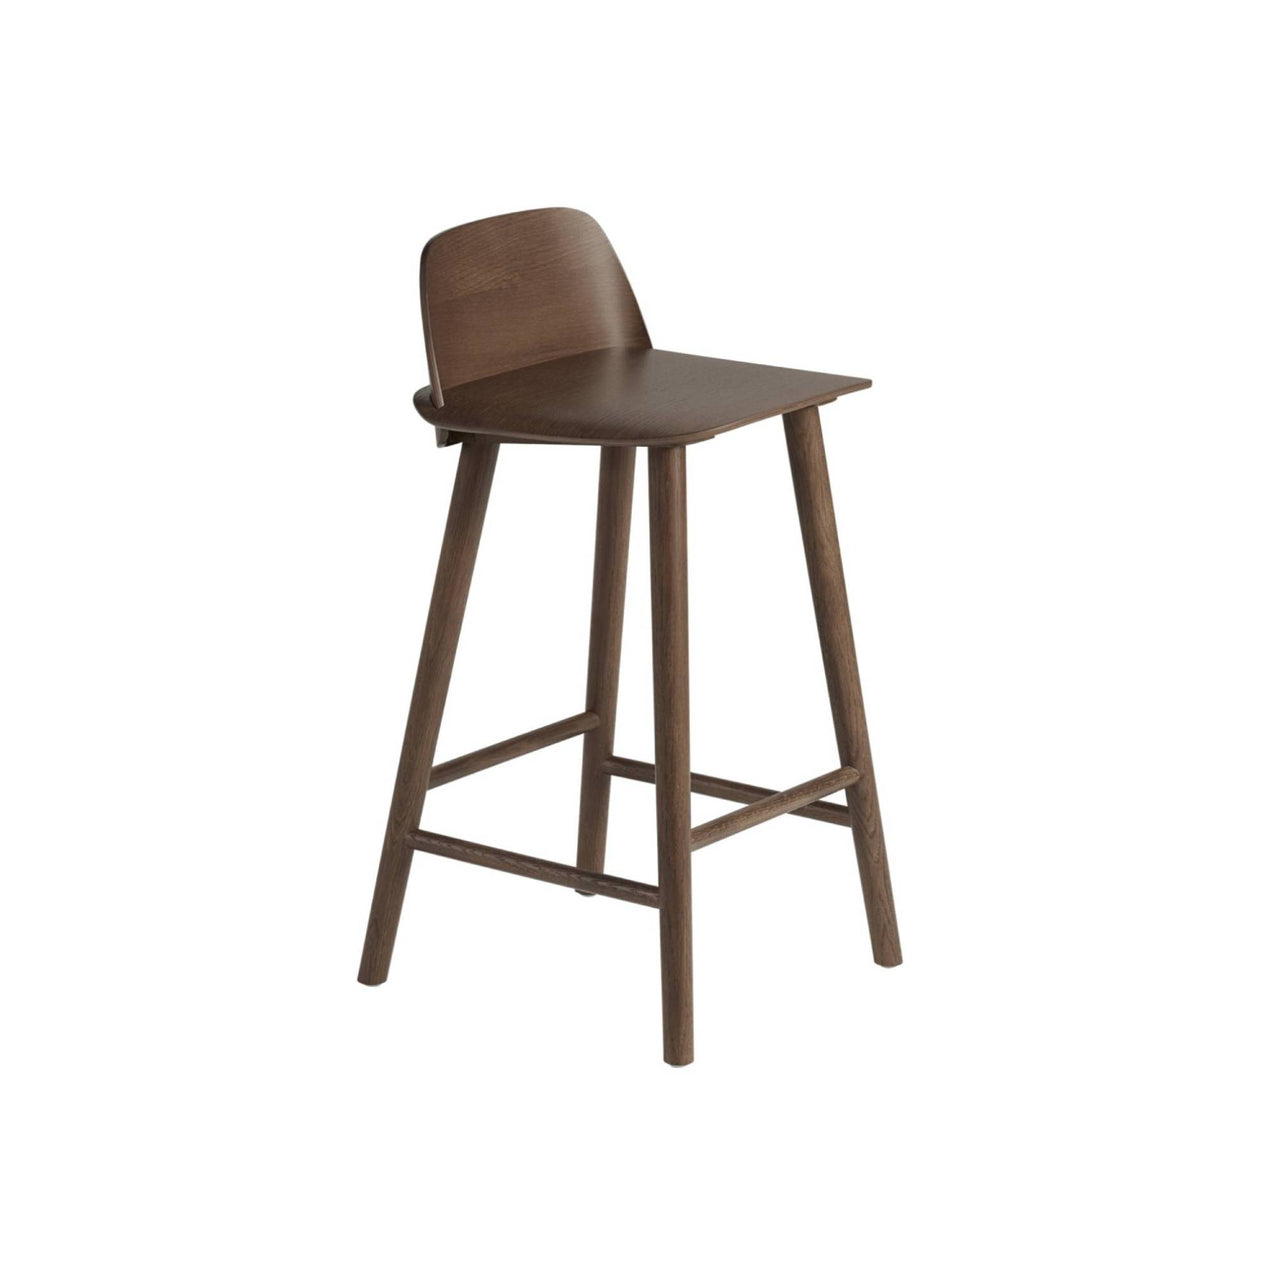 Nerd Bar + Counter Stool: Counter + Stained Dark Brown